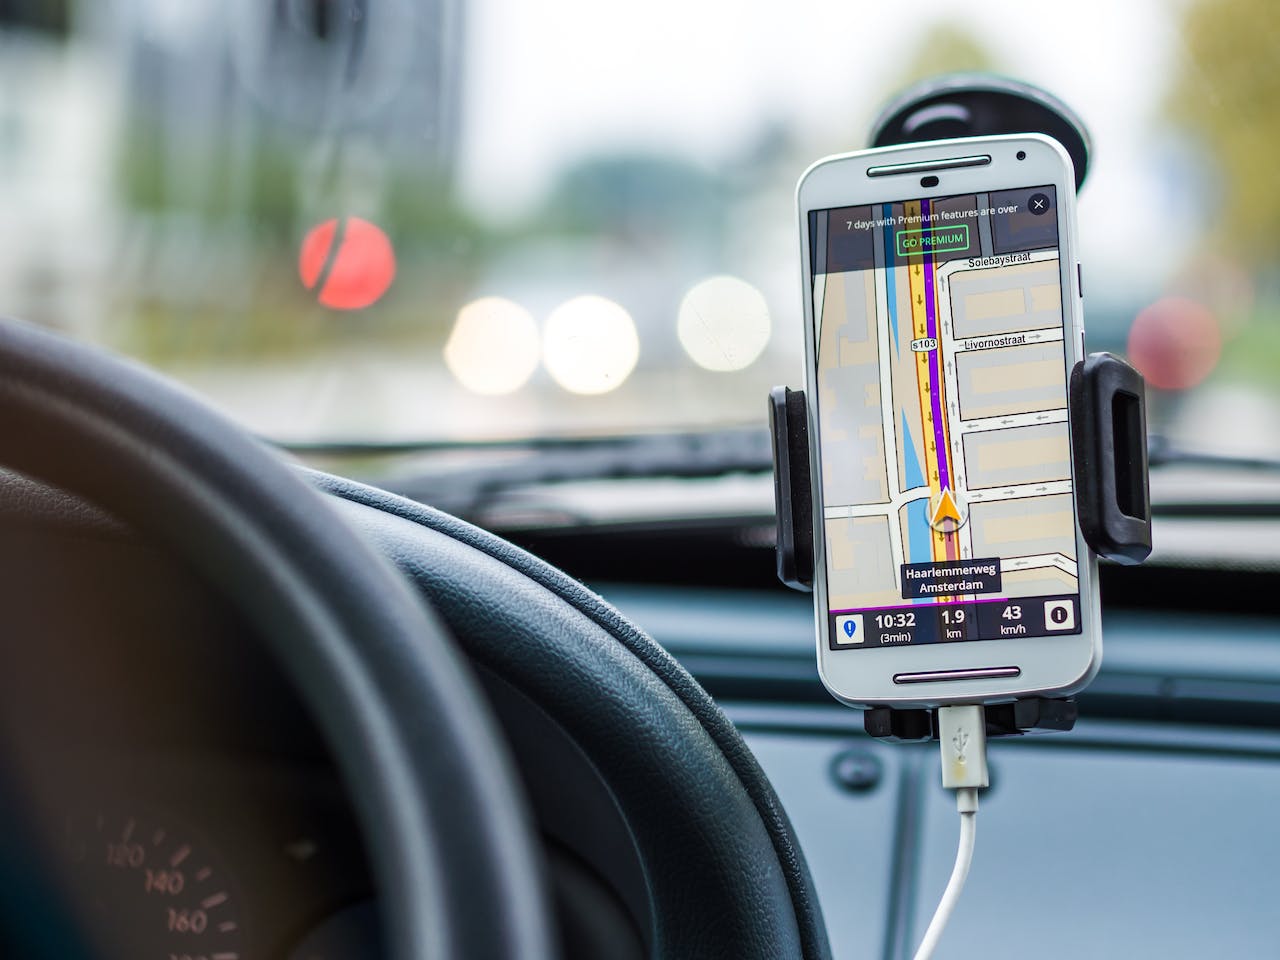 What Is The Difference Between A Car GPS And A Truck GPS?